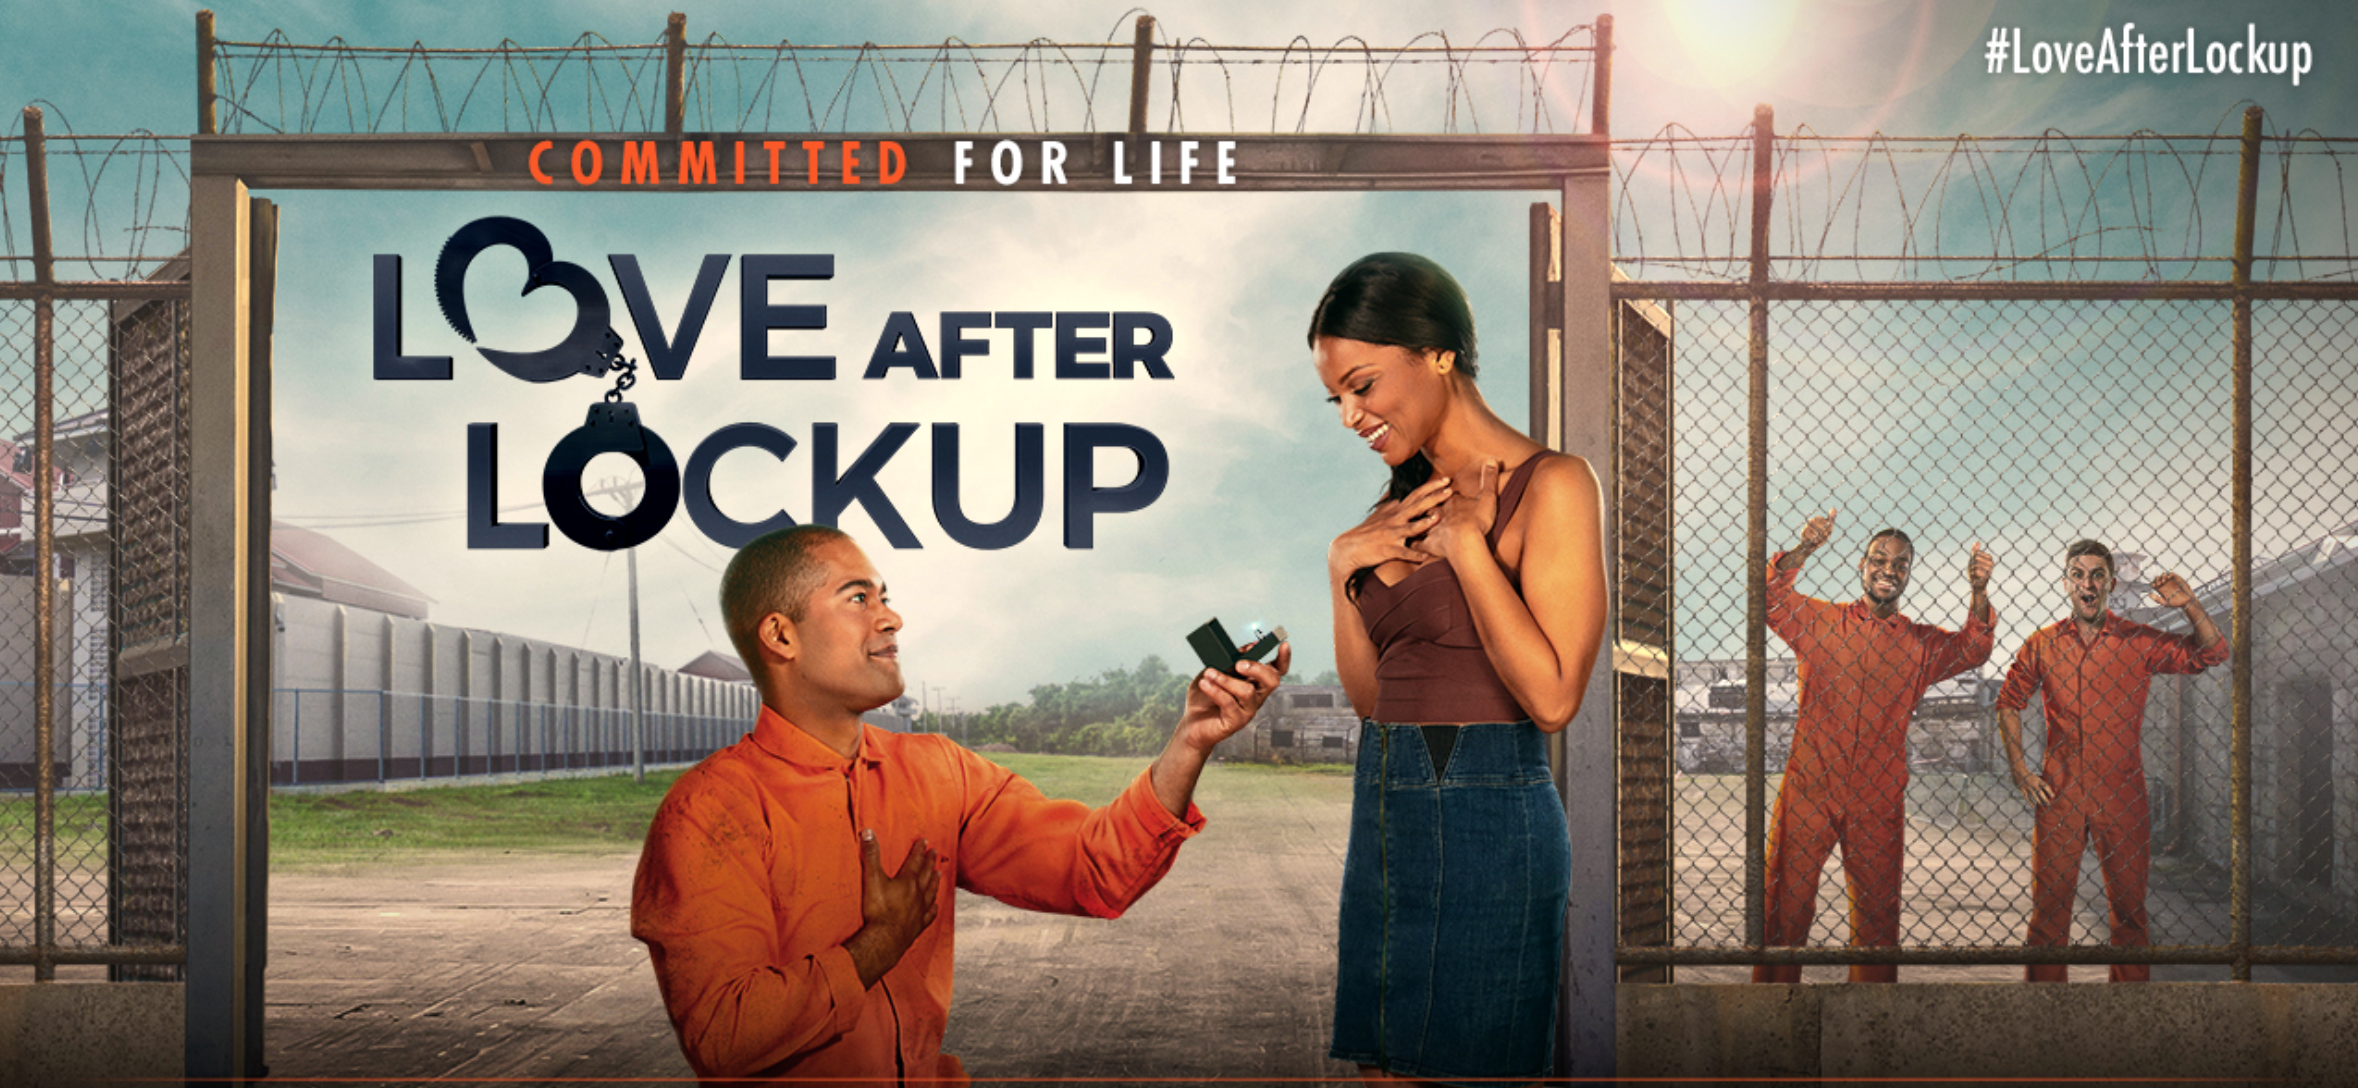 Love After Lockup season 4, episode 25 (11/04/22) How to watch, livestream, time, date, channel